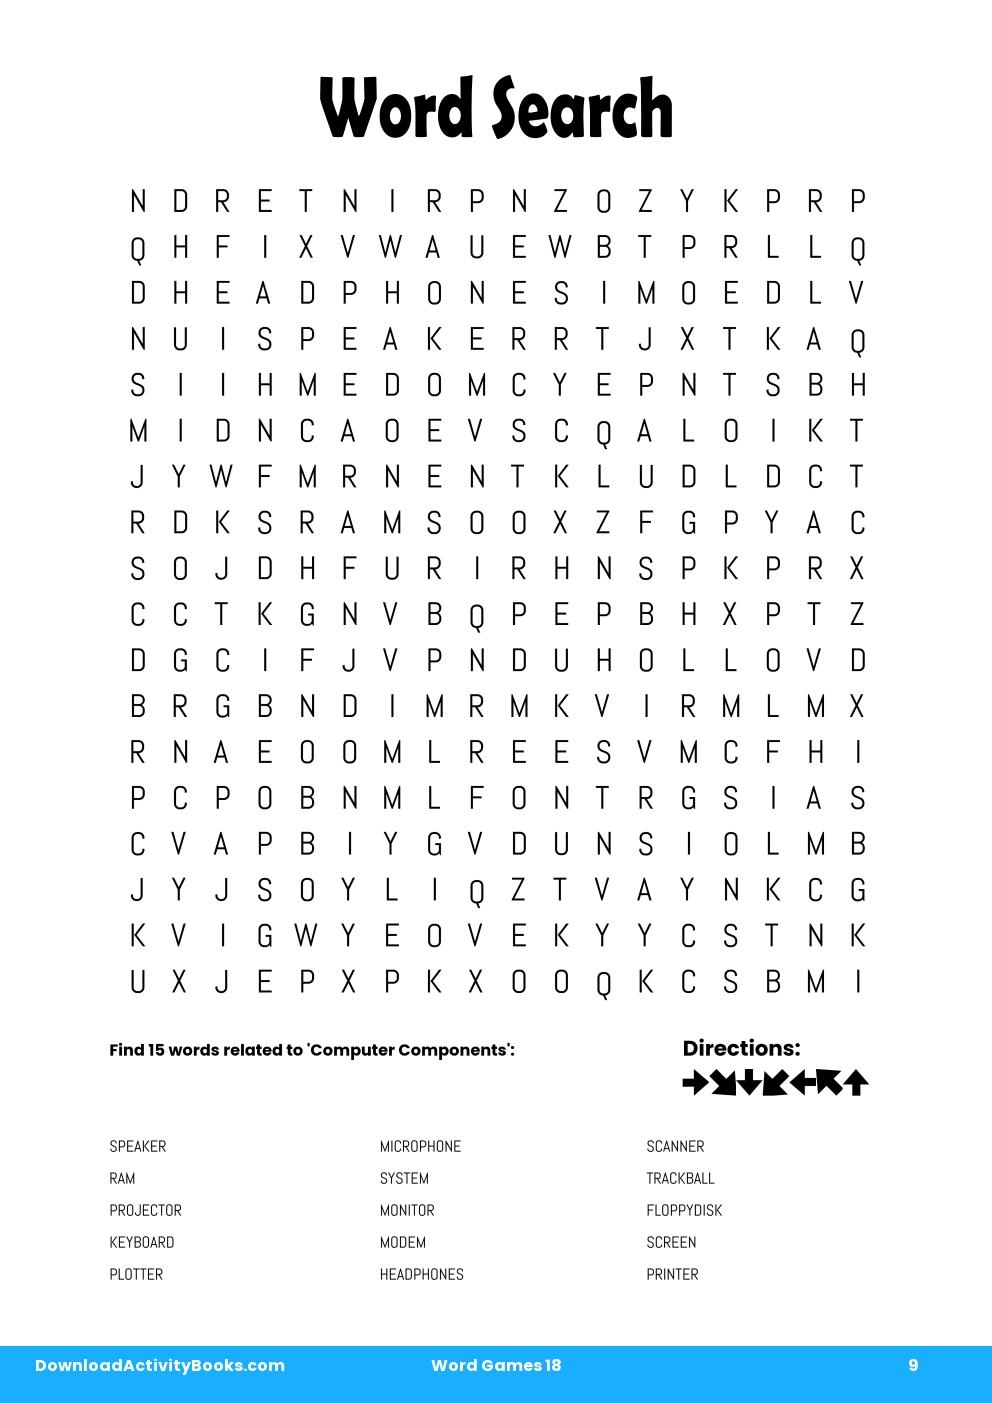 Word Search in Word Games 18